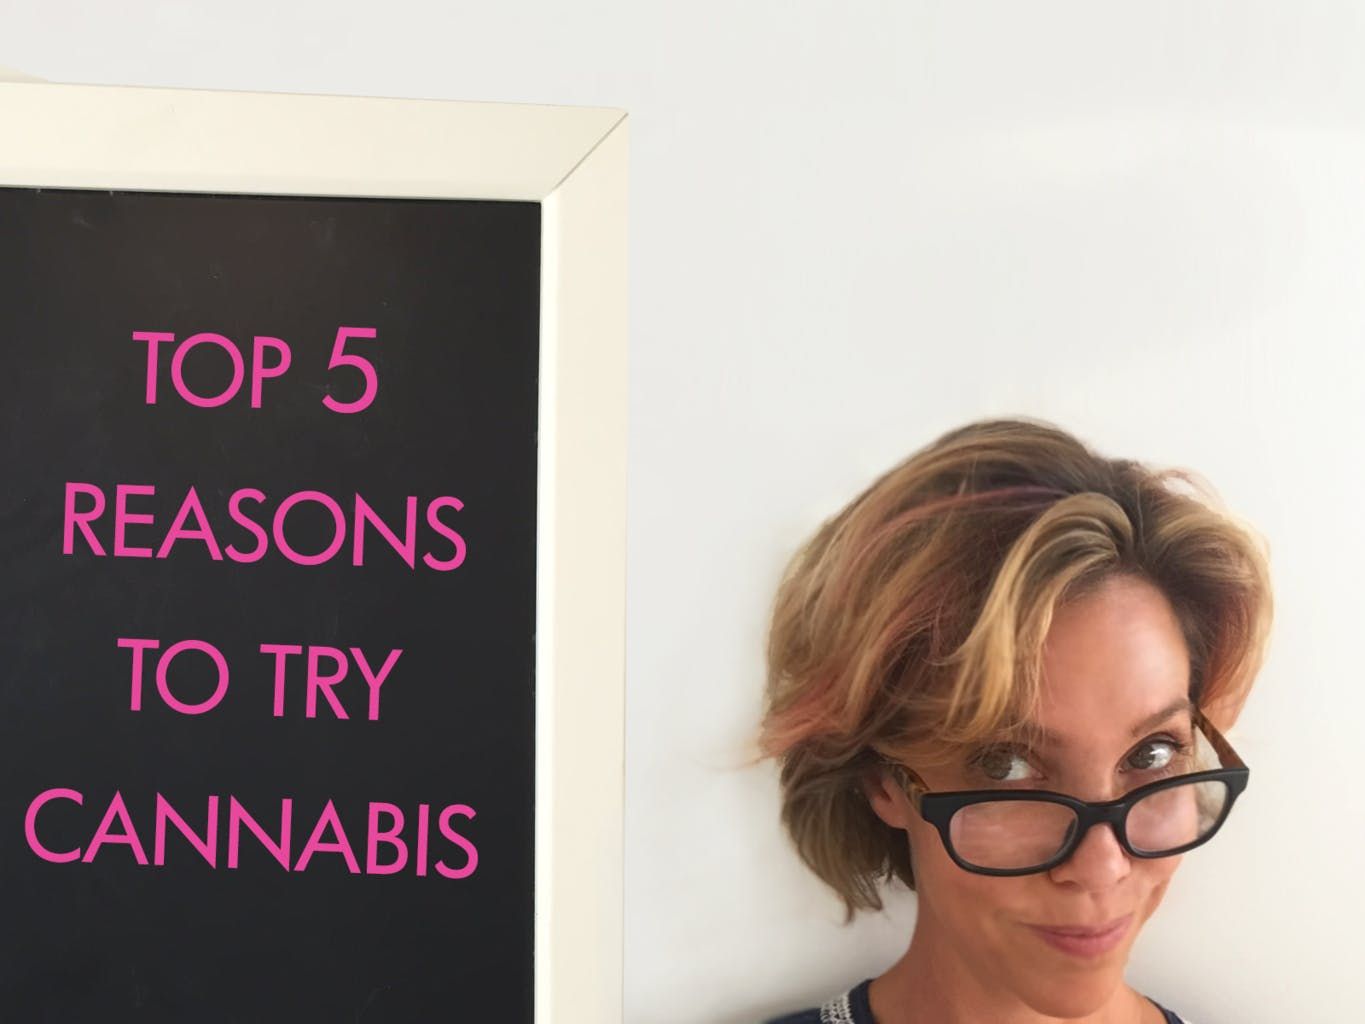 cannabis_improves_your_sex_life_the_top_5_reasons_you_should_give_cannabis_a_try_8deae85249